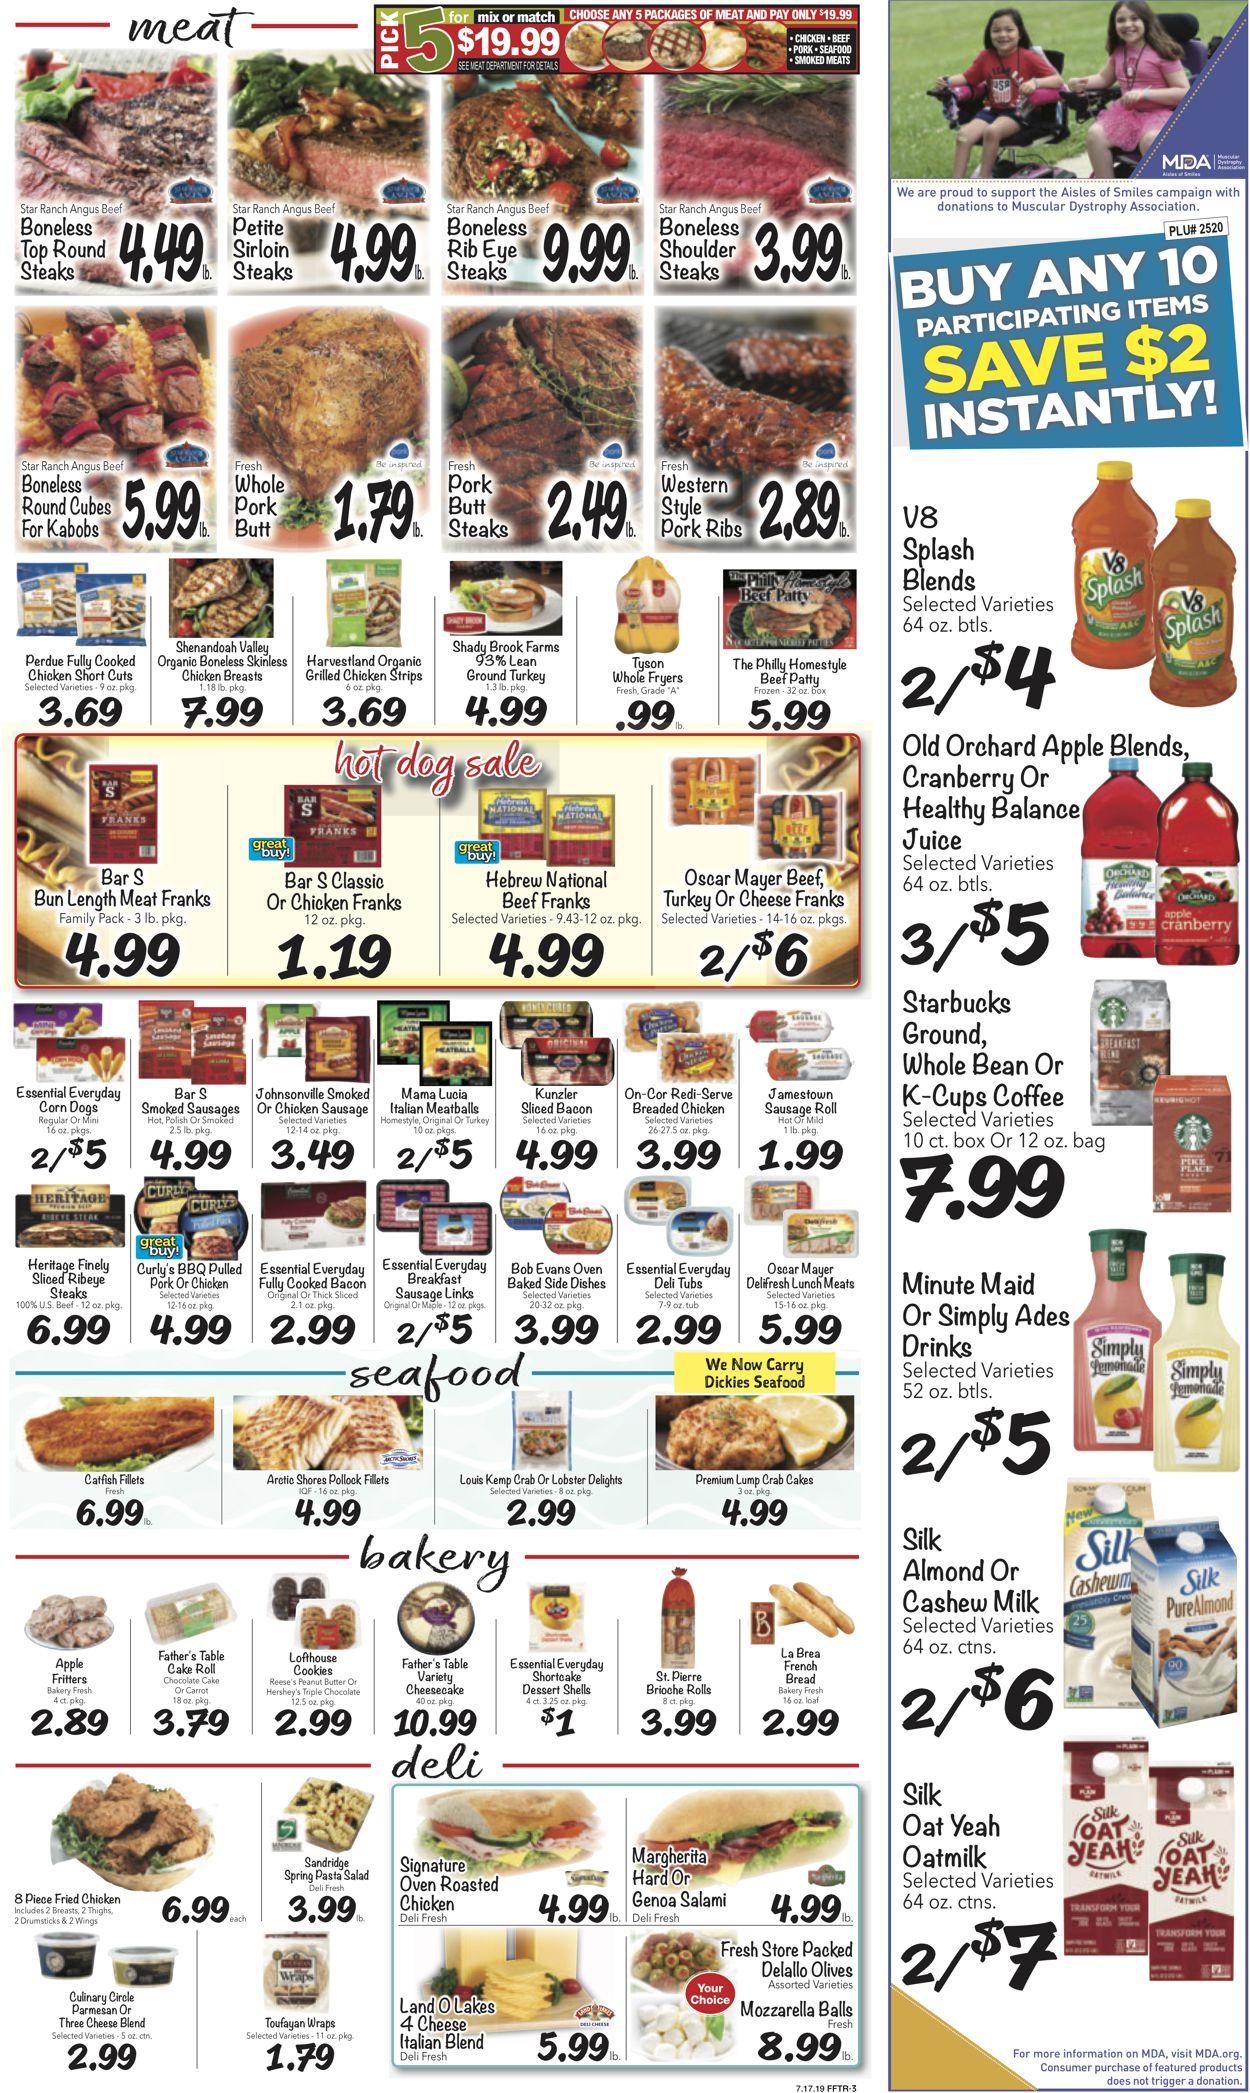 Farm Fresh Current weekly ad 07/17 - 07/23/2019 - frequent-ads.com